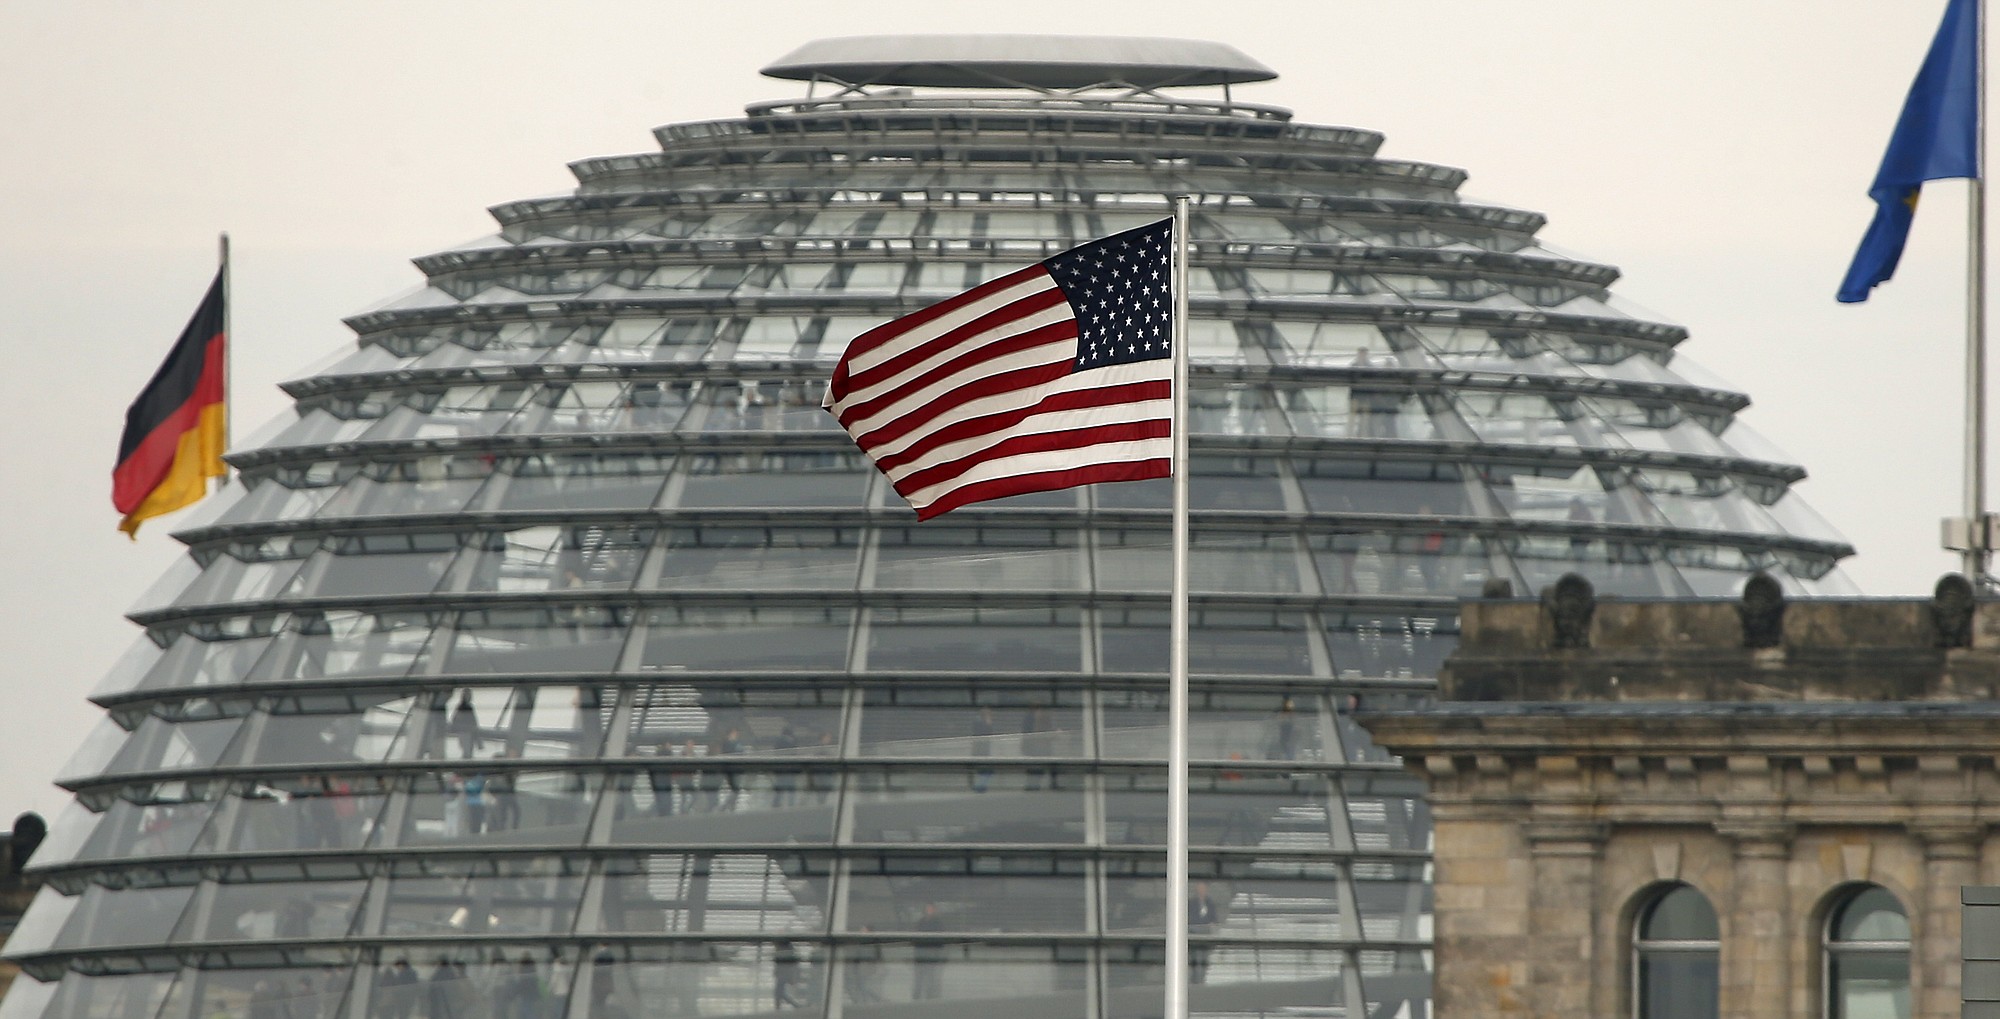 The US  flag flies  on top of the US embassy in front  of the  Reichstag building  that houses the German  Parliament, Bundestag, in Berlin.